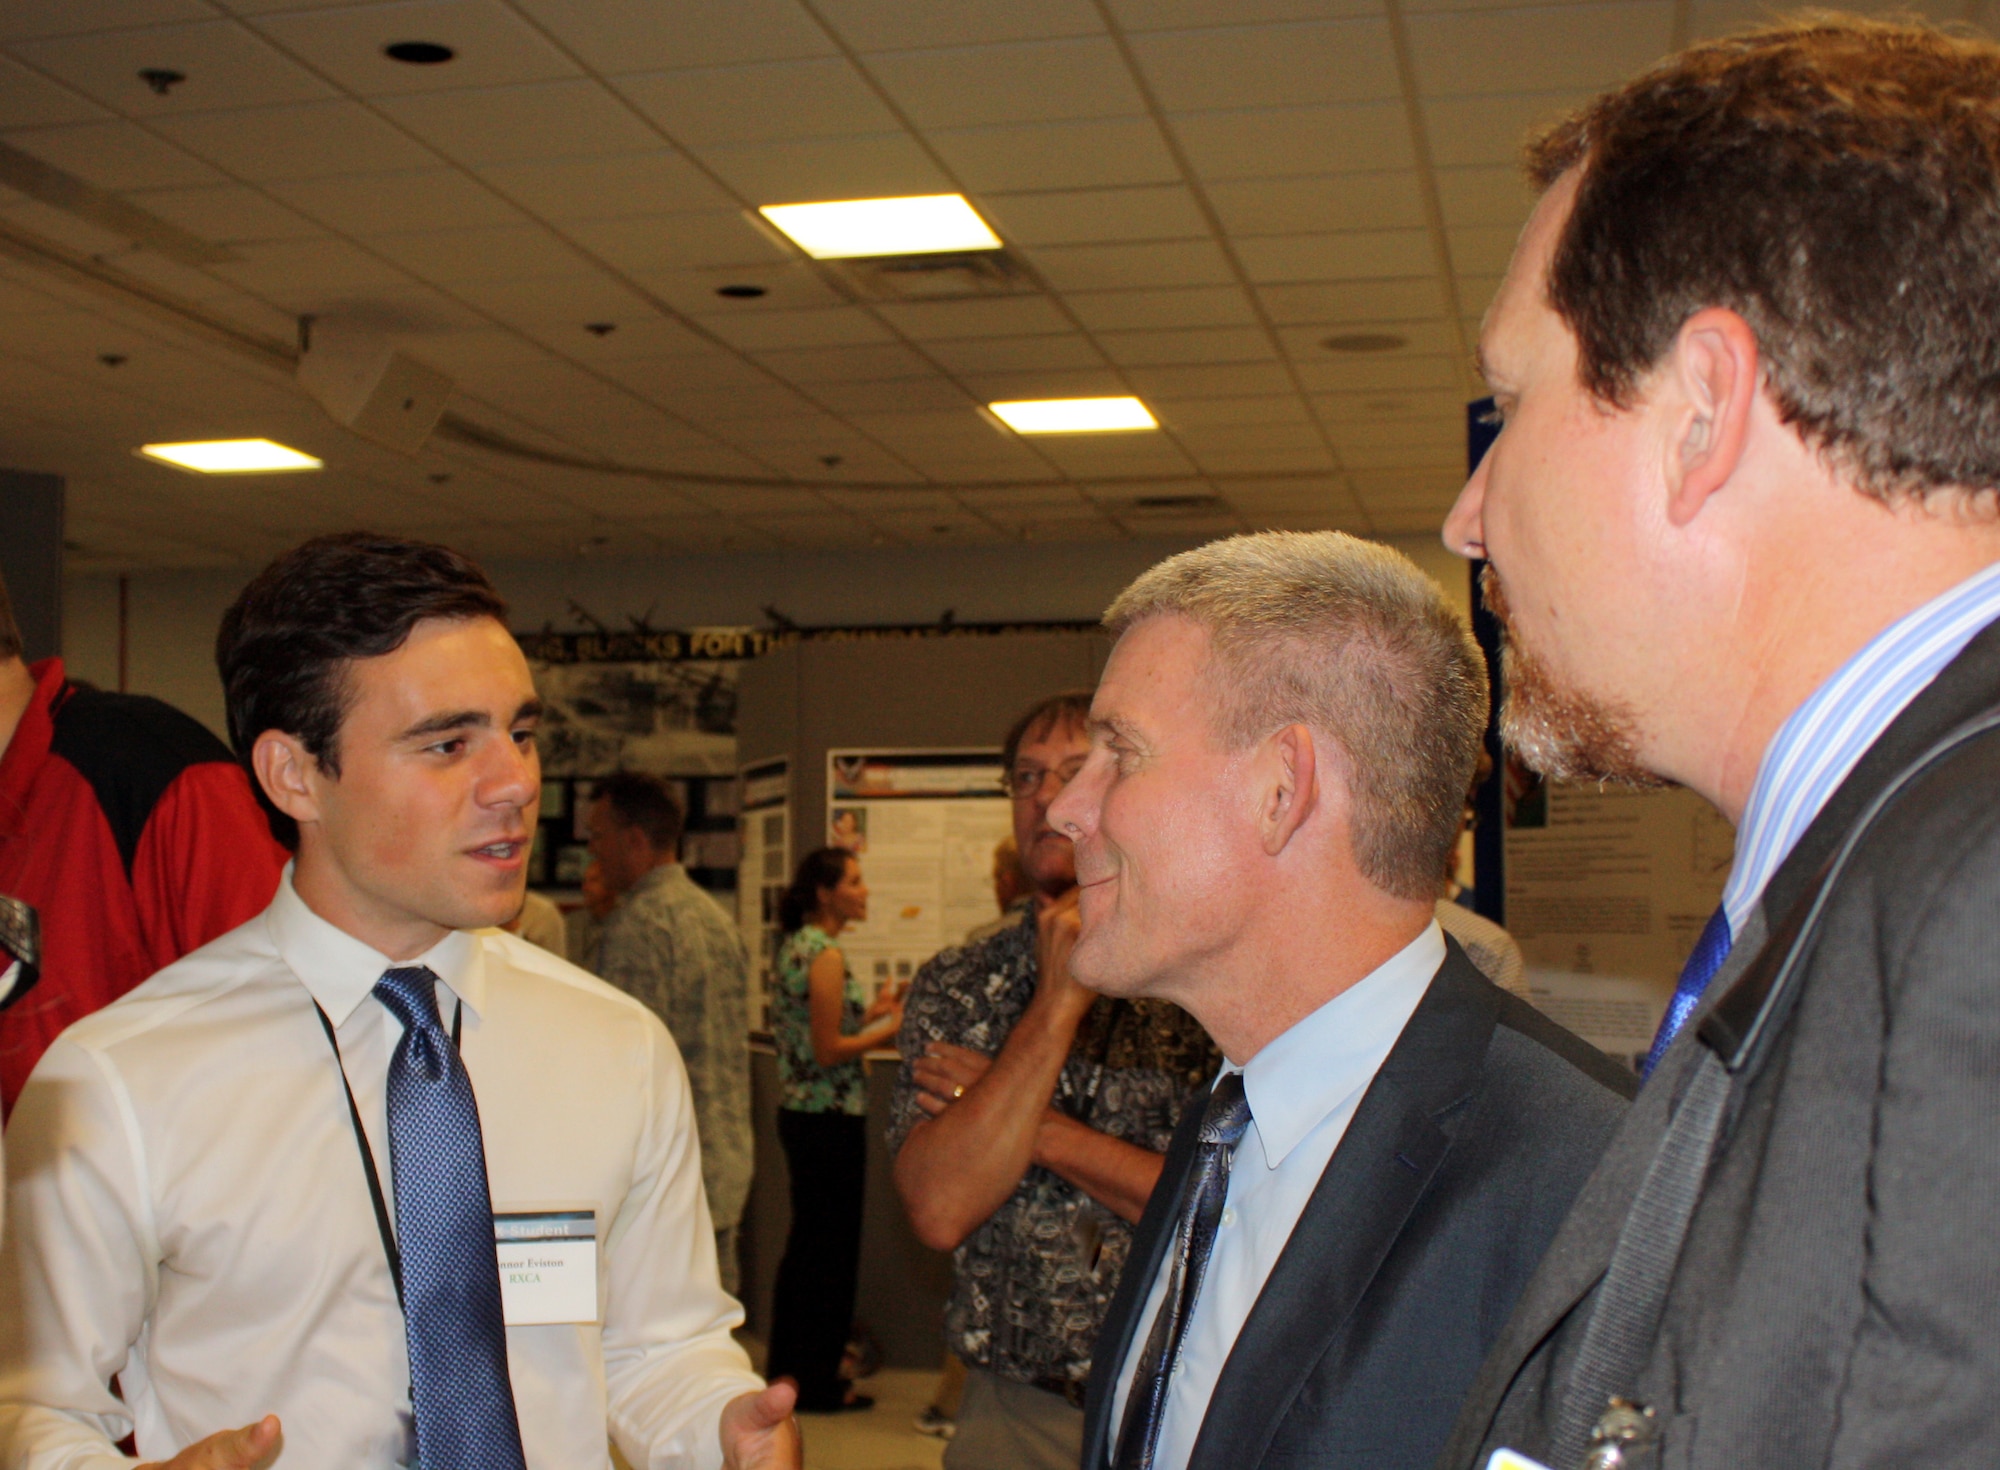 Thomas Lockhart (center), Director, AFRL Materials and Manufacturing Directorate, and Chad Watchorn (right), Executive Director, Regional STEM Collaborative, speak with interns Connor Eviston and Megan Imel (unpictured), undergraduate students from the University of Cincinnati and Wright State University, respectively, during the 2016 RX Summer Student Poster Session, Aug. 5. Eviston and Imel researched nondestructive evaluation and thermal signals for impact-damaged polymer matrix composites this summer. (U.S. Air Force photo/Marisa Novobilski)